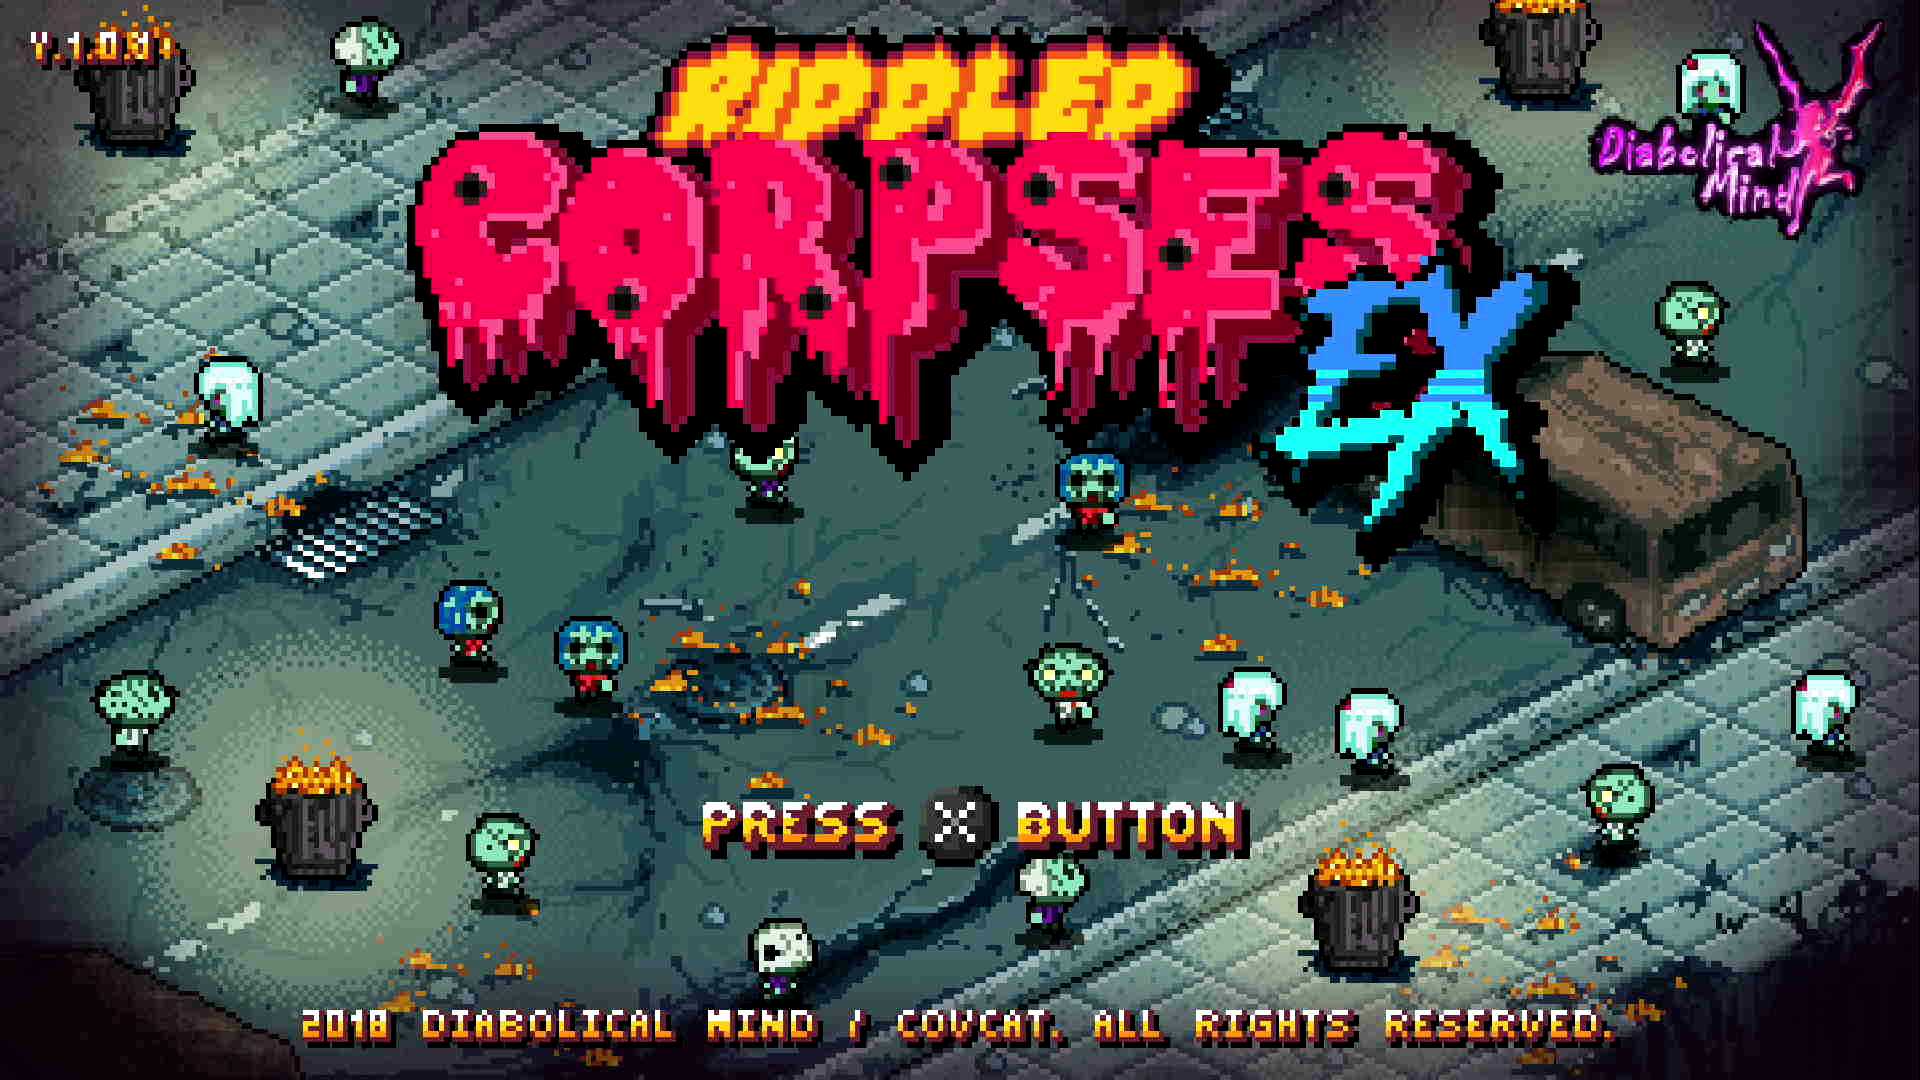 Riddled corpses ex